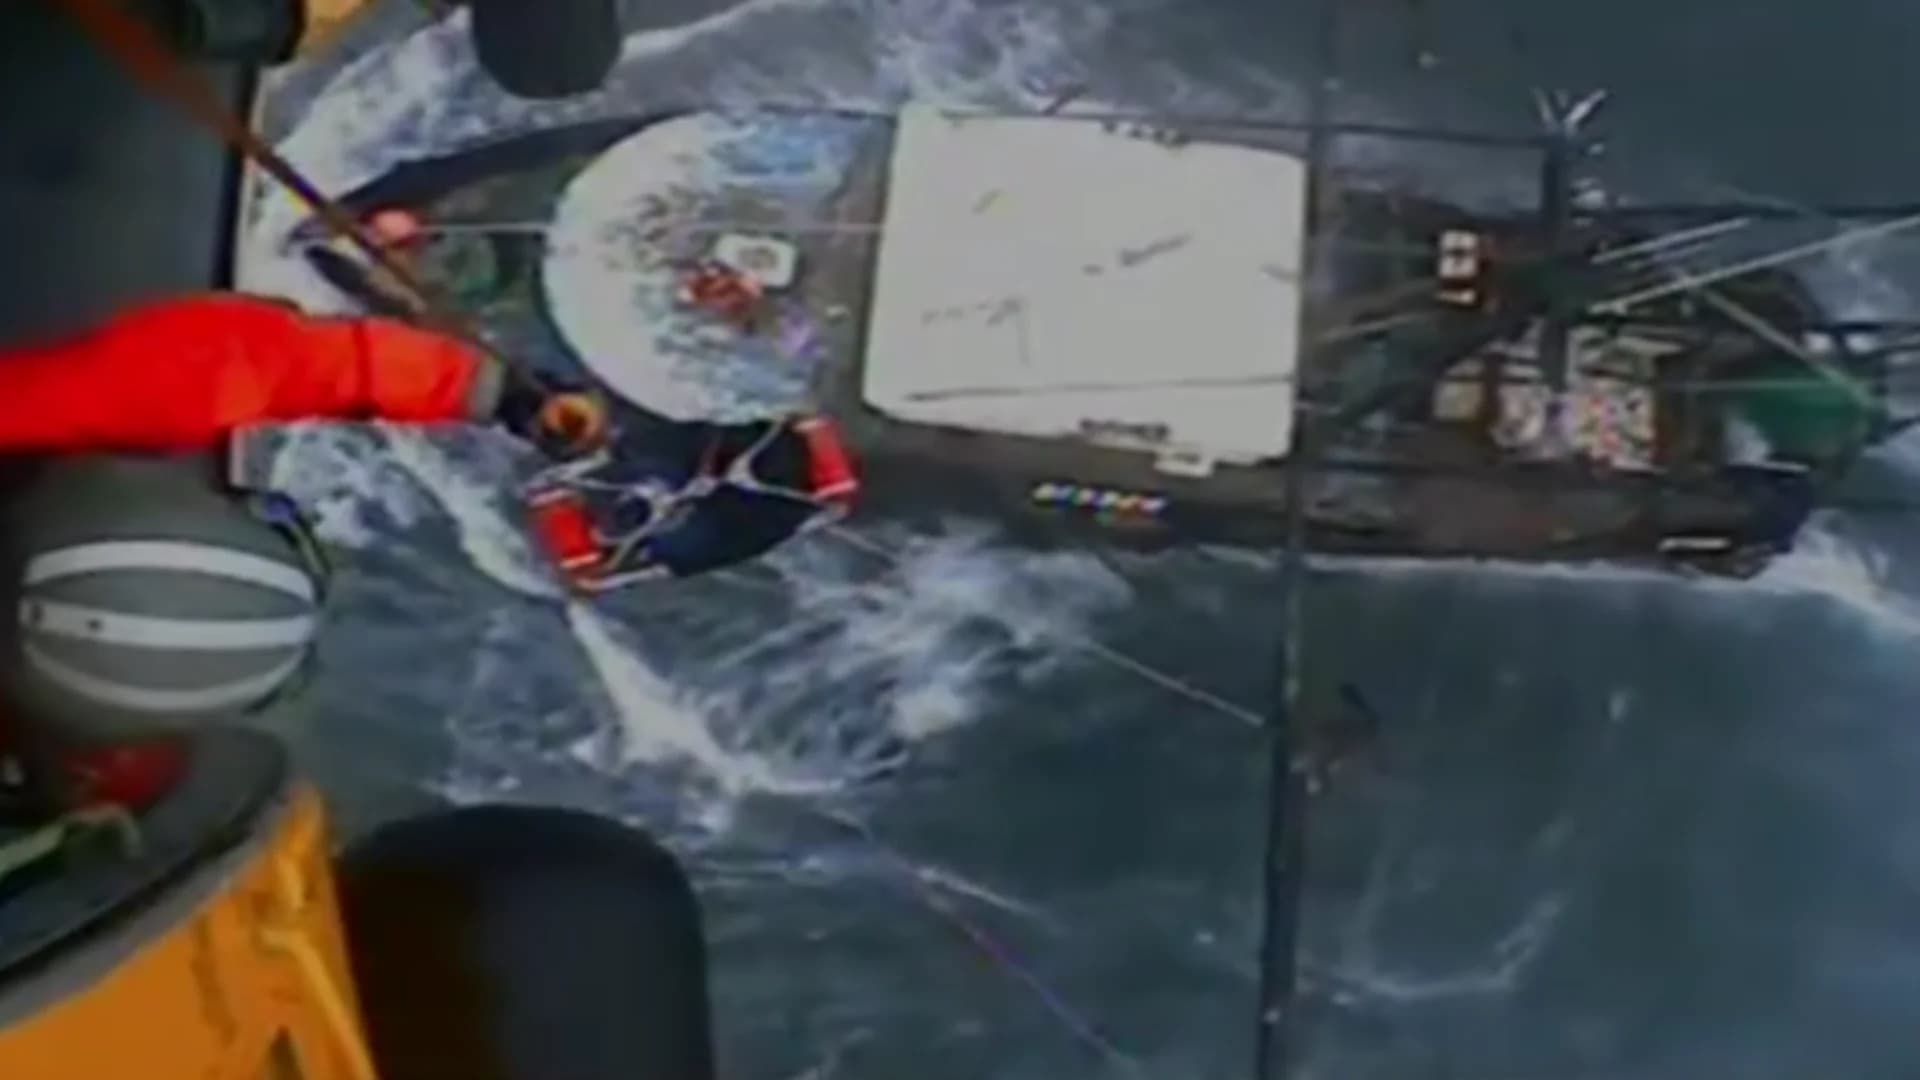 Coast Guard airlifts man off fishing vessel in Montauk